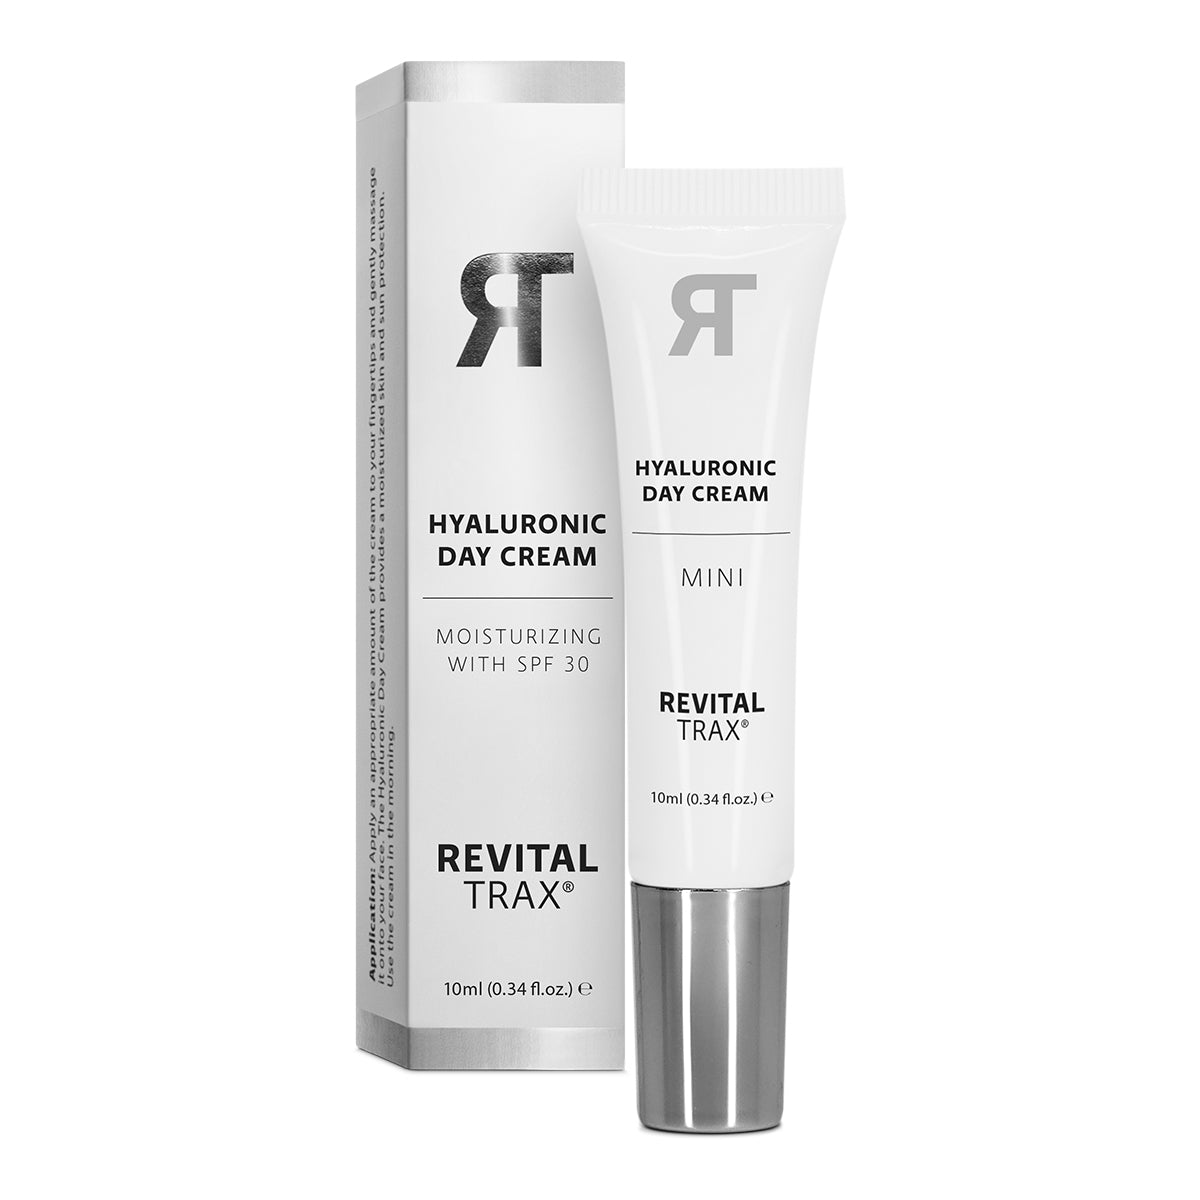 Mini - Hyaluronic Day Cream with SPF30